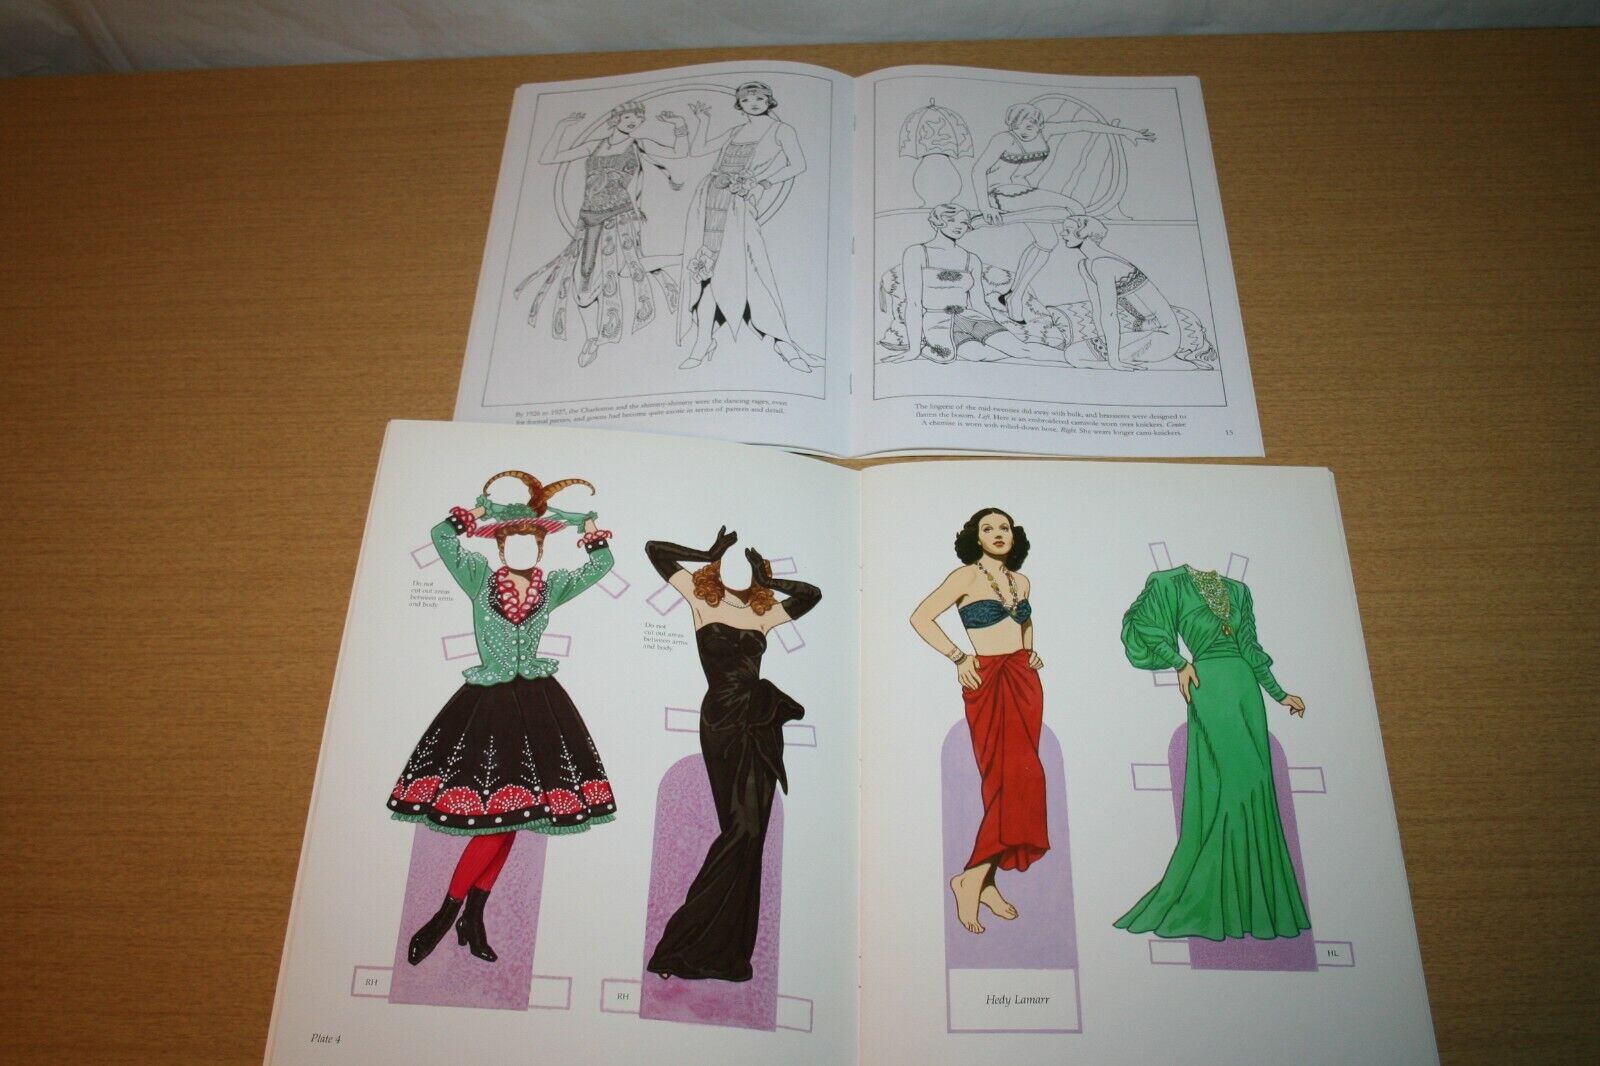 Tierney Paper Doll & Coloring Book Glamorous Stars & Fashions Roaring 20s #10 Tom Tierney - фотография #4